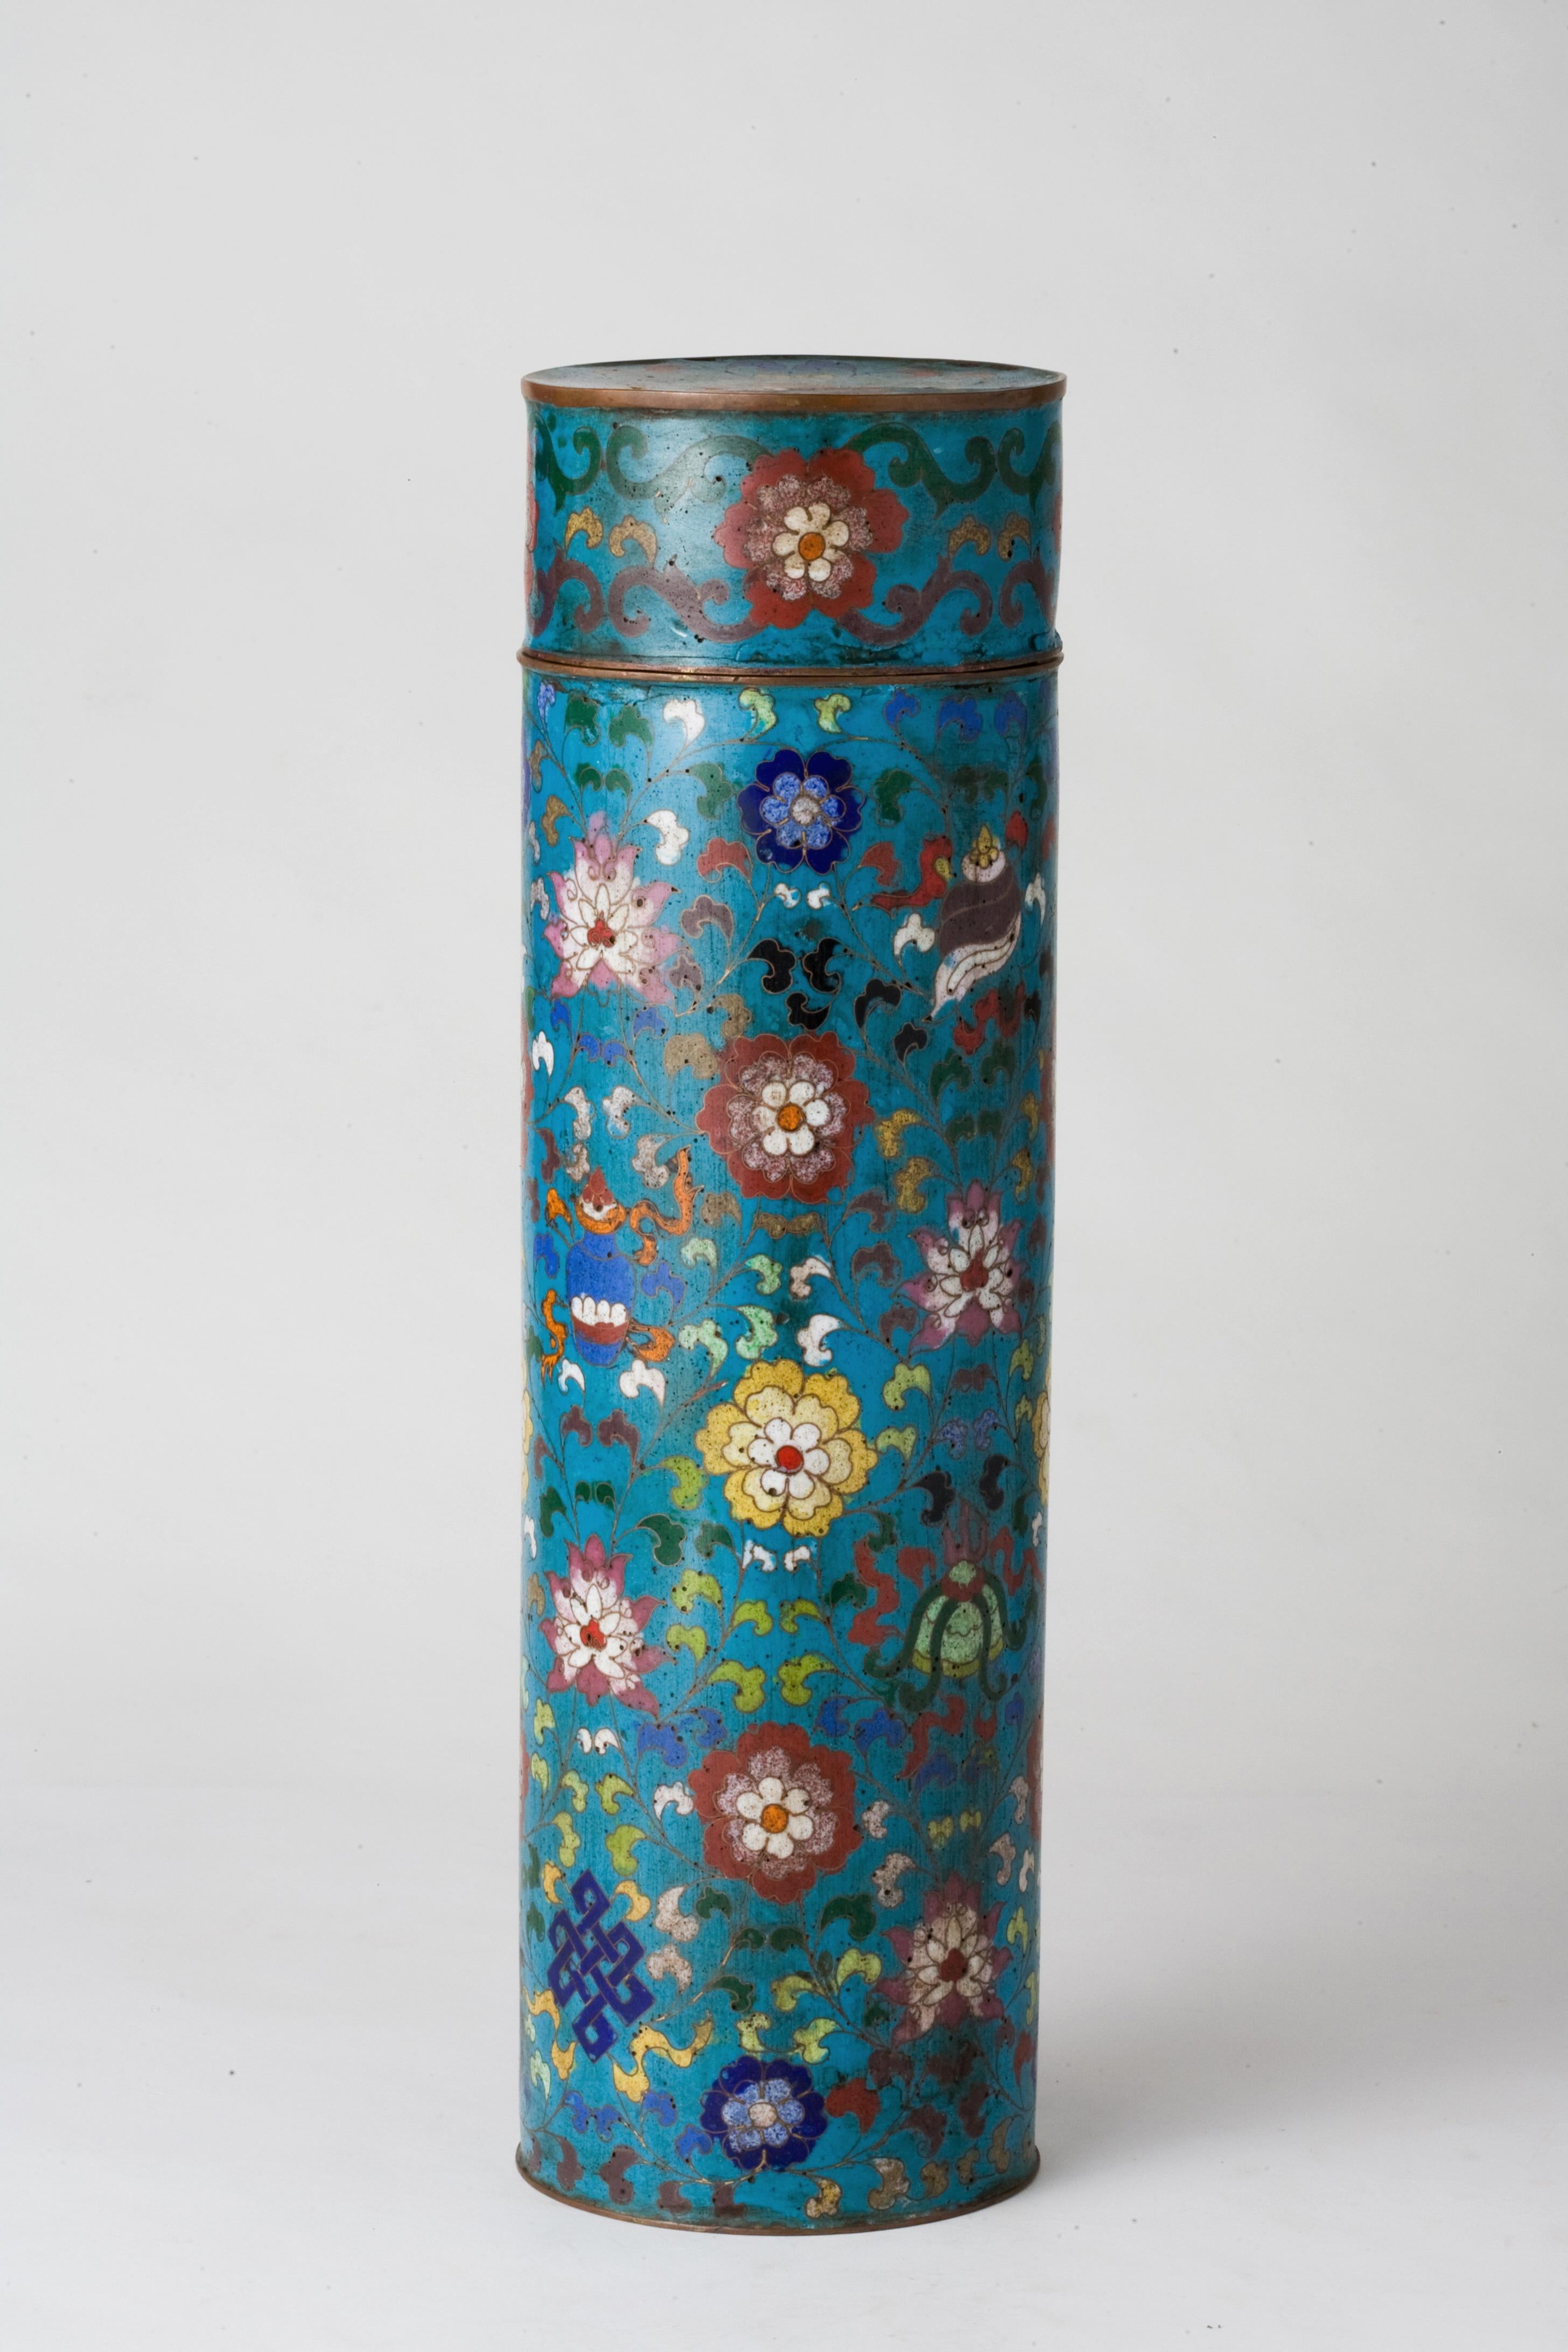 This exquisite vase is a fine example of Ming Dynasty cloisonné, an era renowned for revolutionizing the cloisonné technique with intricate design and vibrant enamel work. The cylindrical vase is meticulously adorned with floral motifs, each bloom a